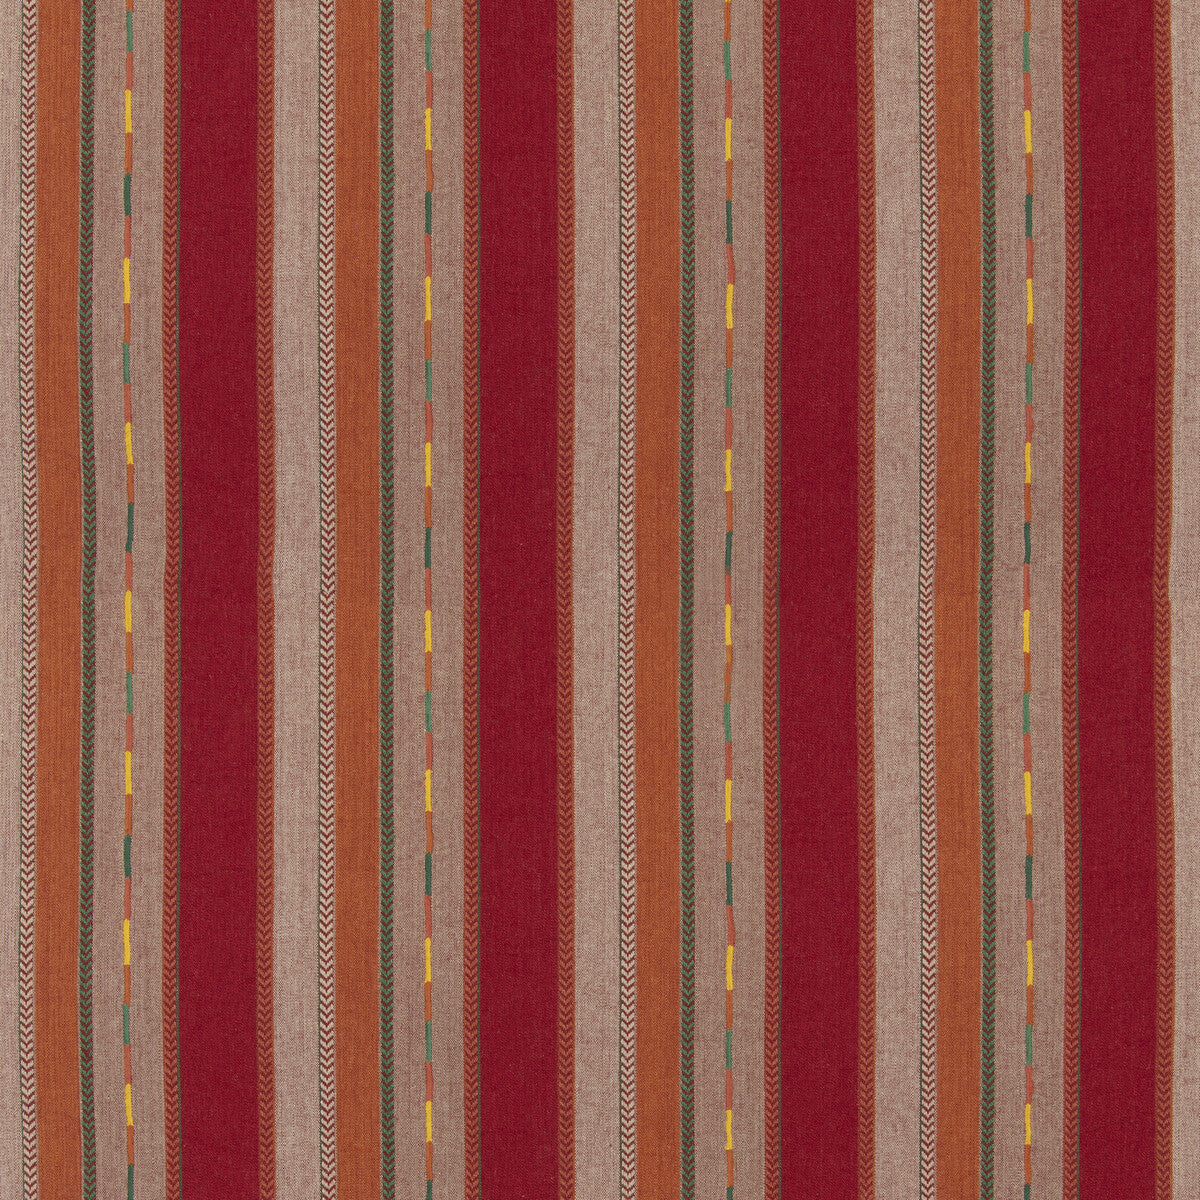 Bunty fabric in red color - pattern BF11062.1.0 - by G P &amp; J Baker in the X Kit Kemp Stripes collection